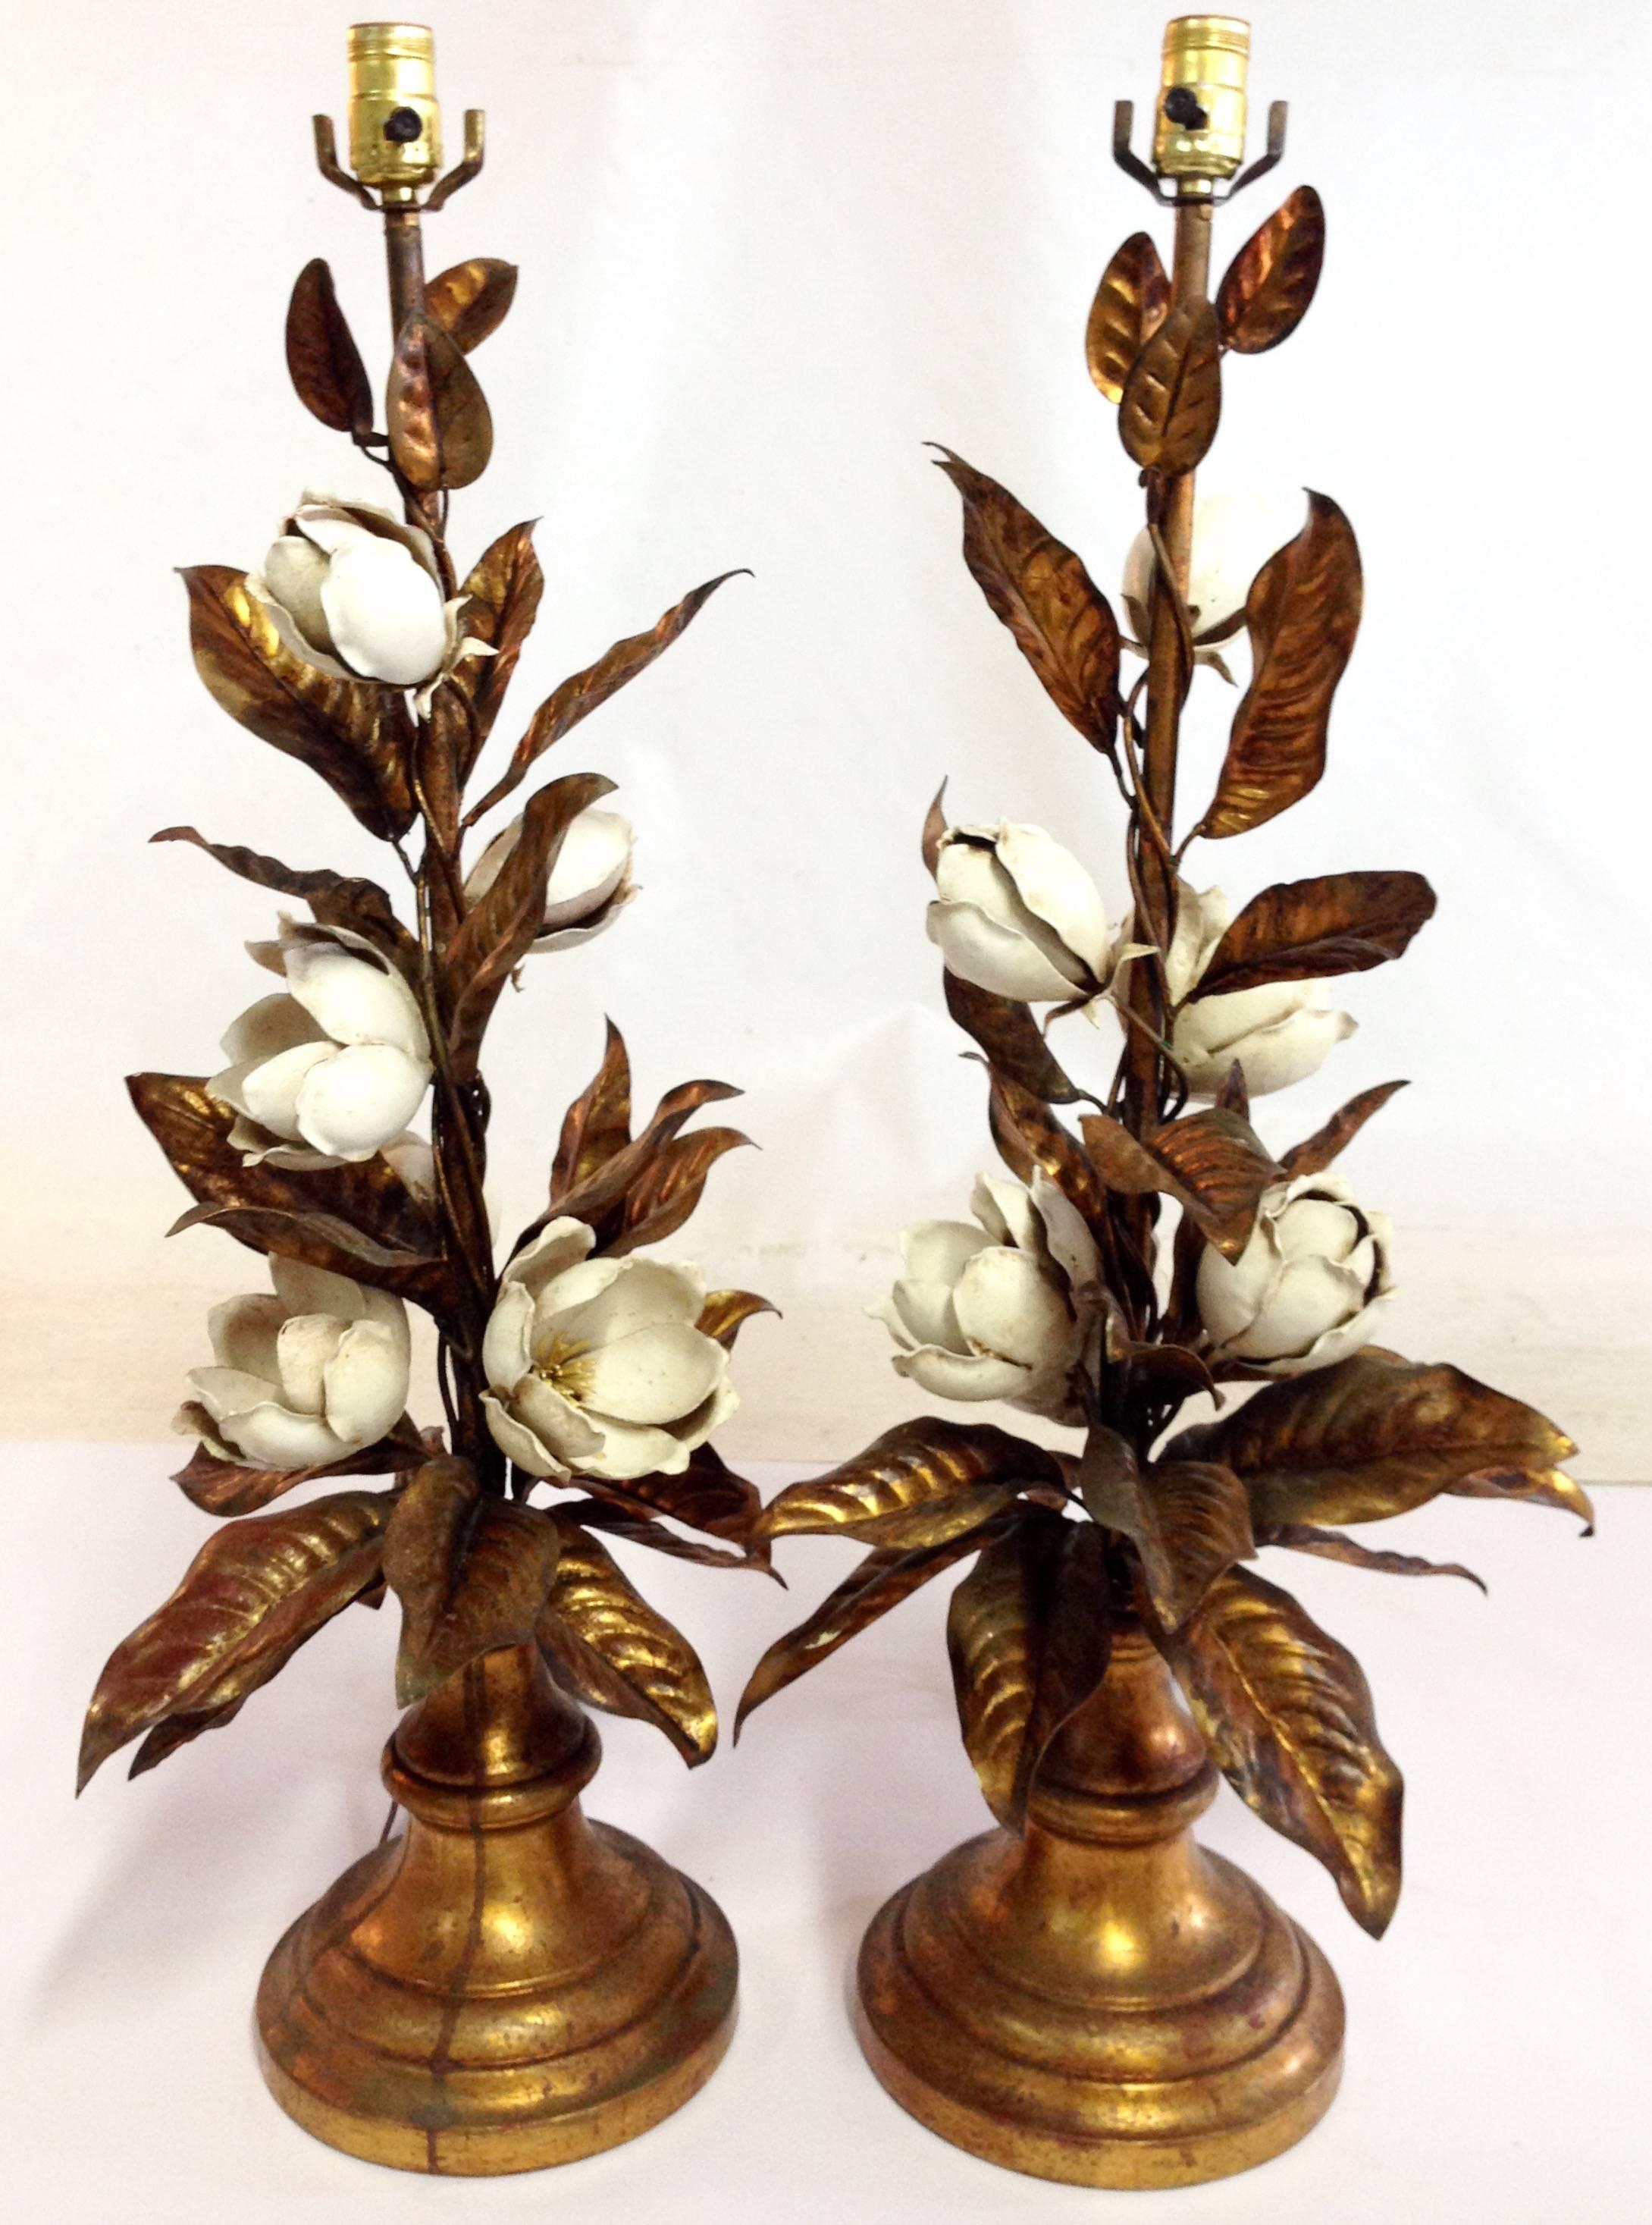 Pair of Italian gilt tole leaf and rose lamps on giltwood bases with off-white silk shades. Each shade has gold gilt rose and vine motif appliqués made of resin. Leaves are adjustable. Each lamp signed with metal hang tag: 